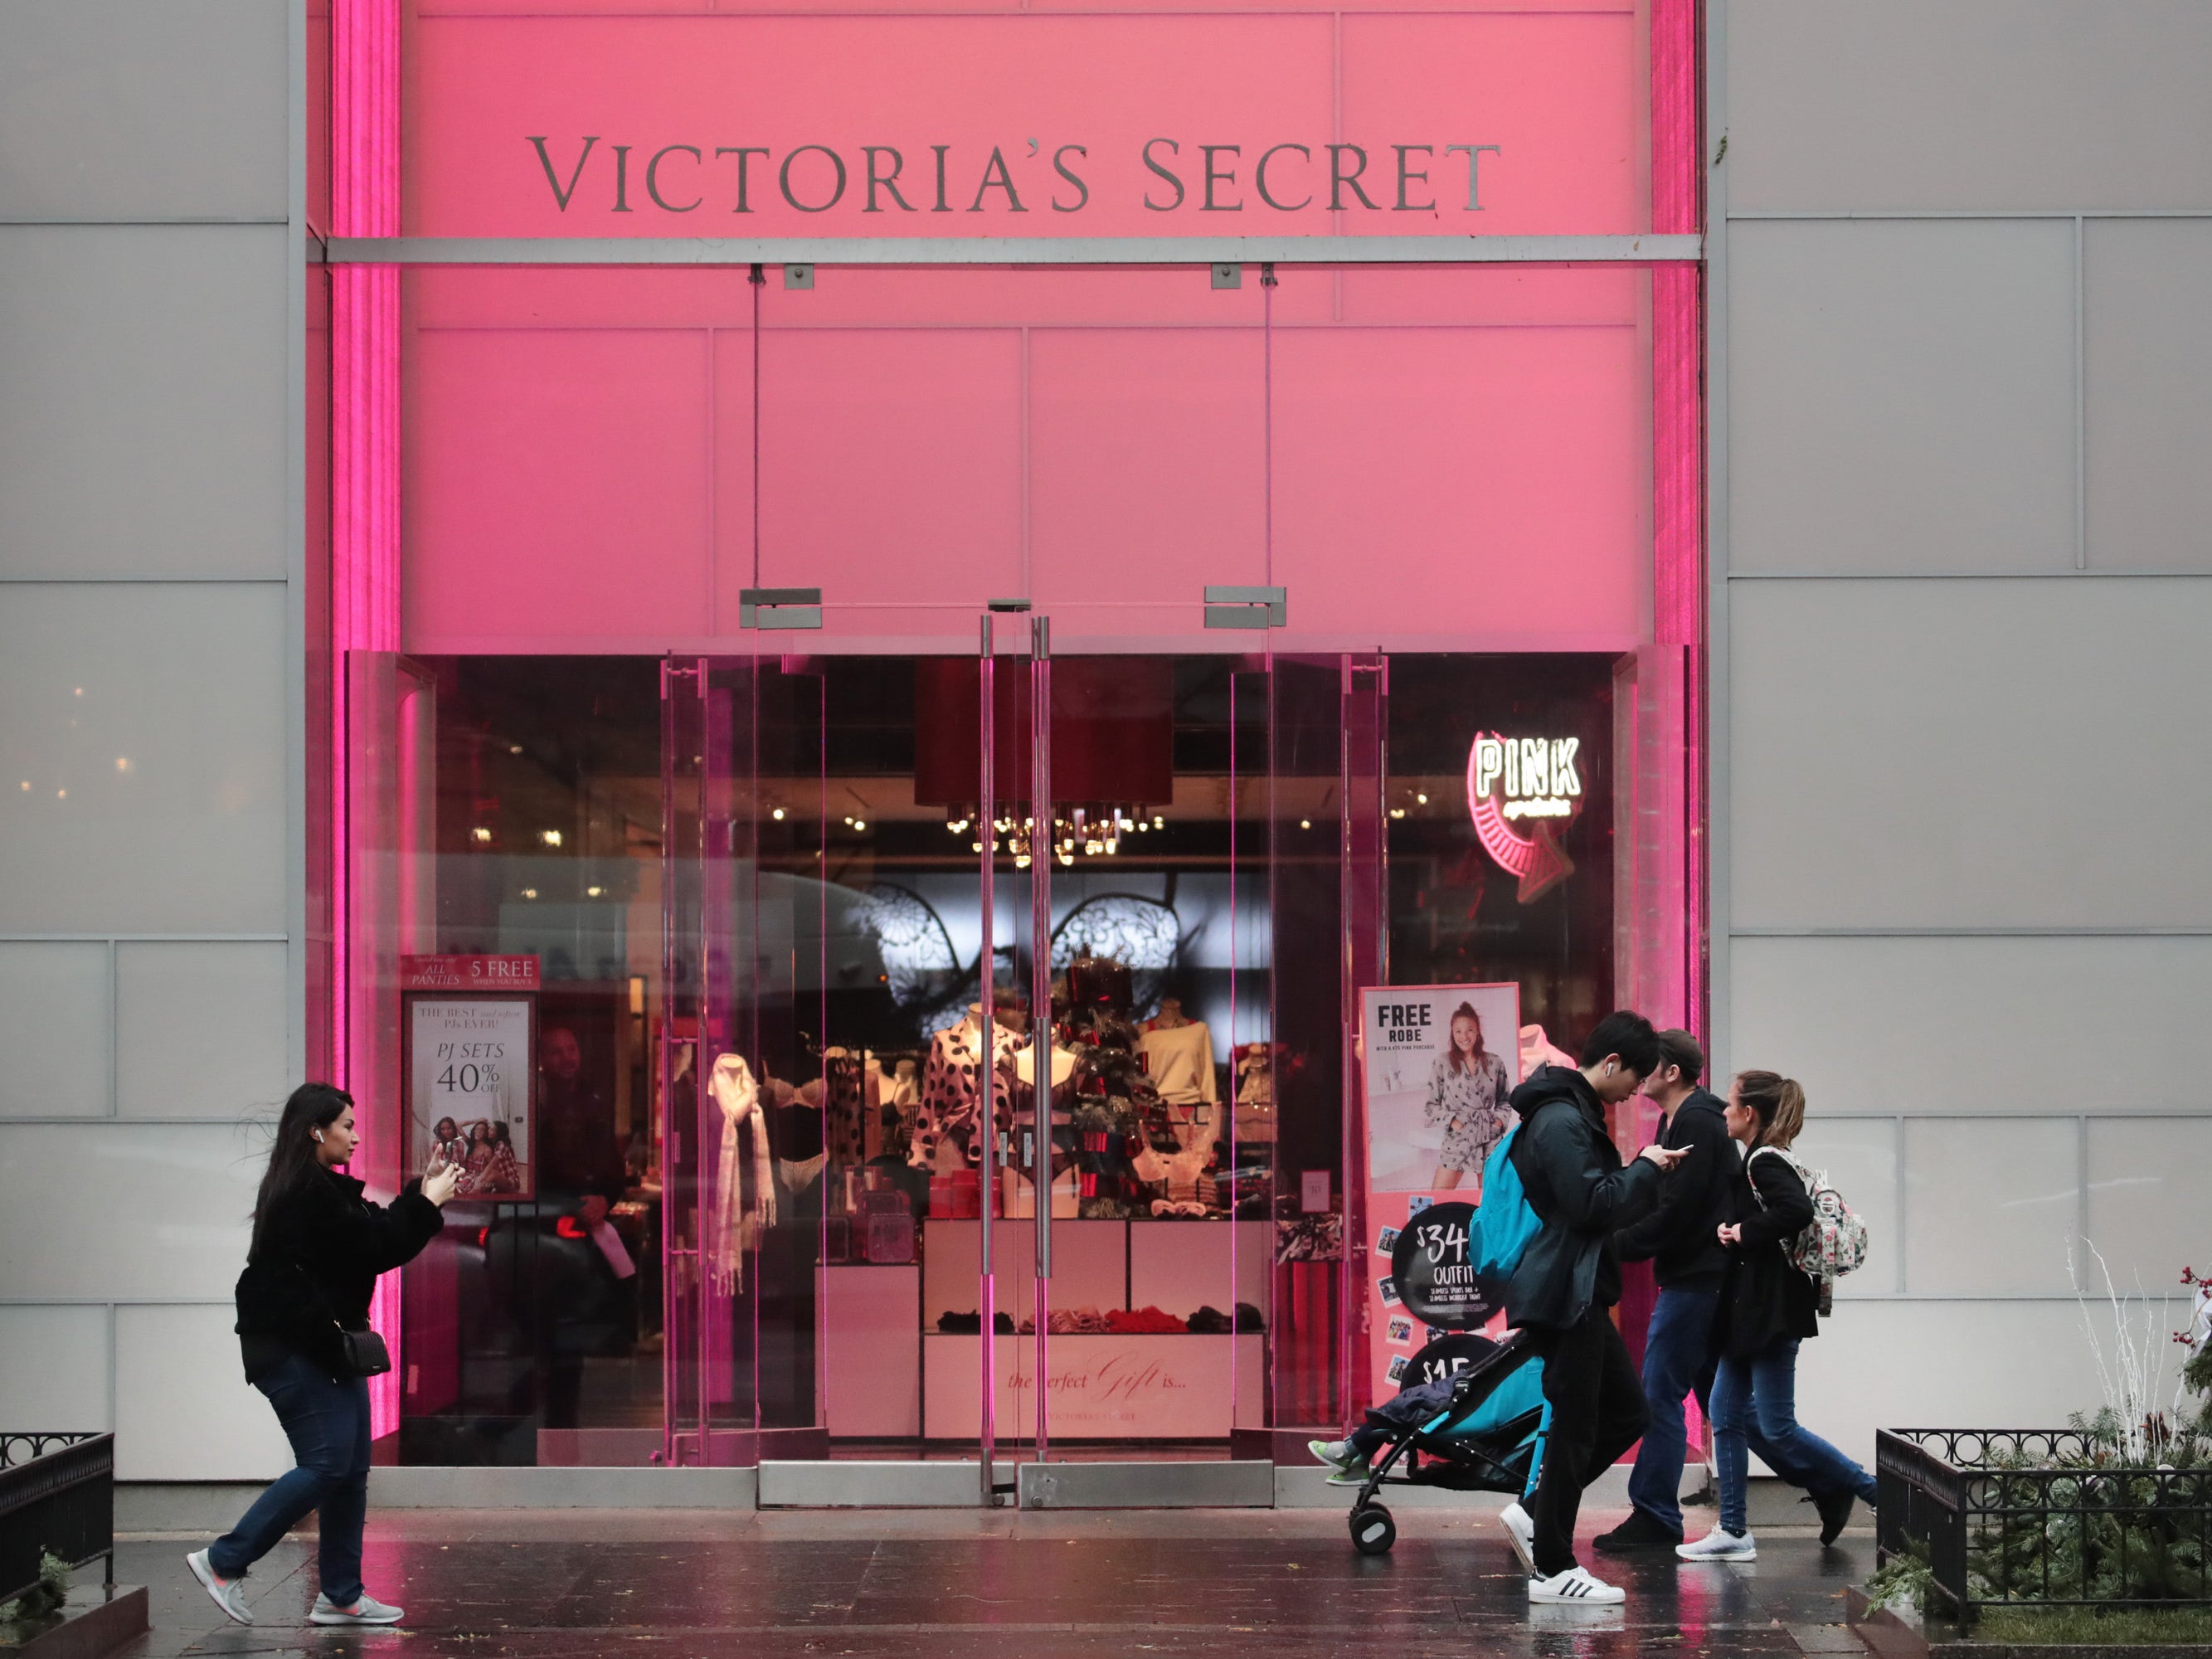 Victoria Secret has really been declining lately and nobody knows